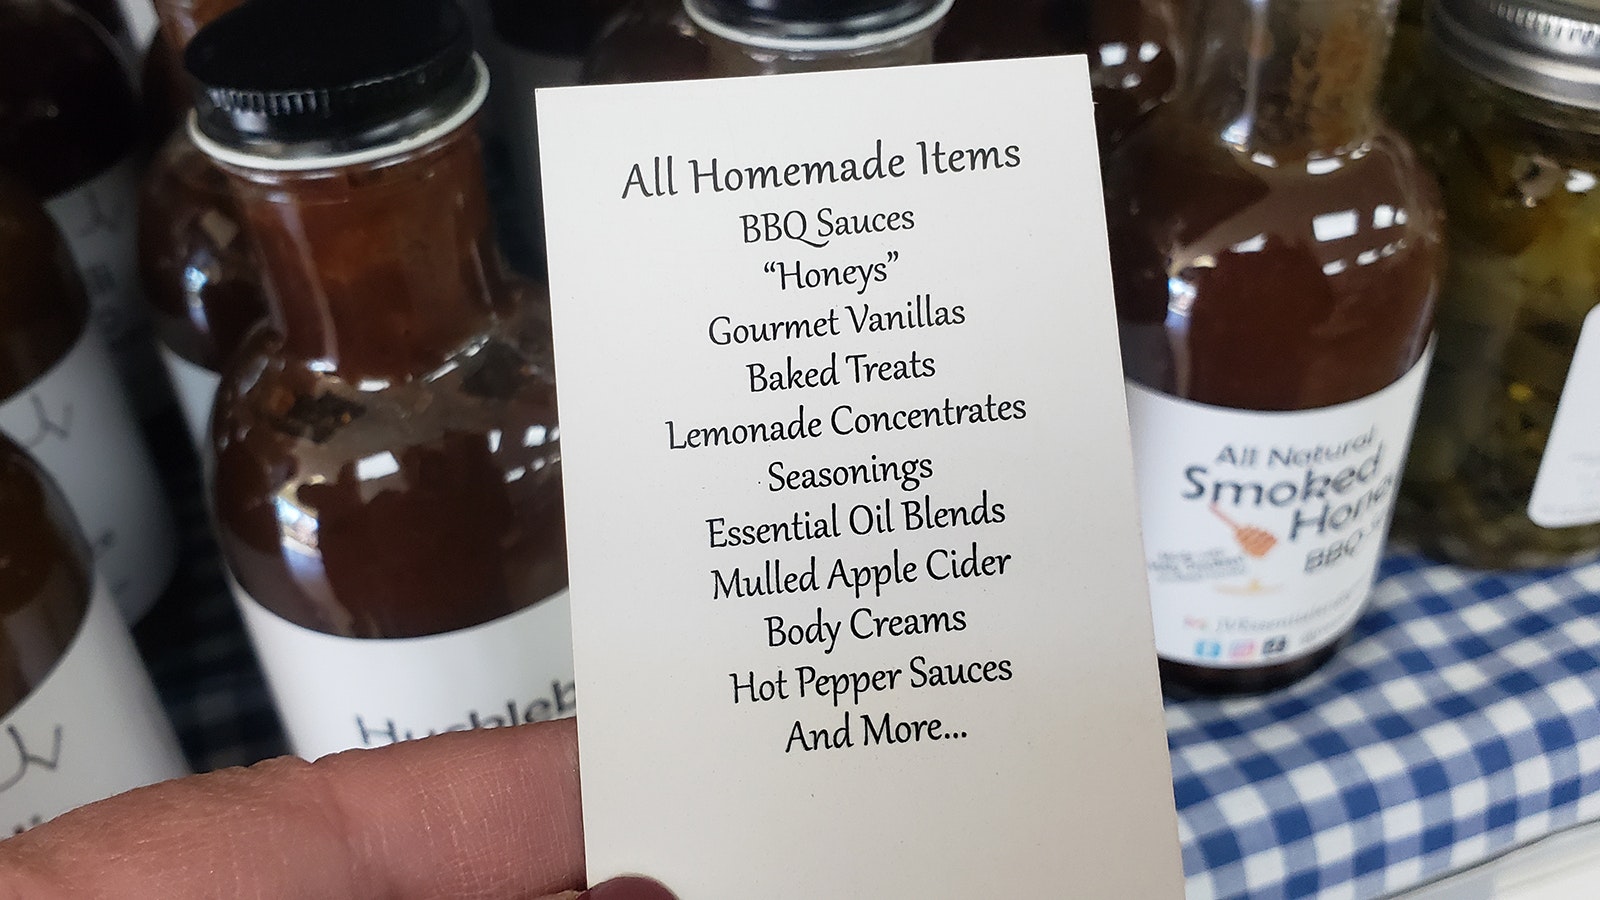 Homemade barbecue sauces, body creams and more from JV Essentials.